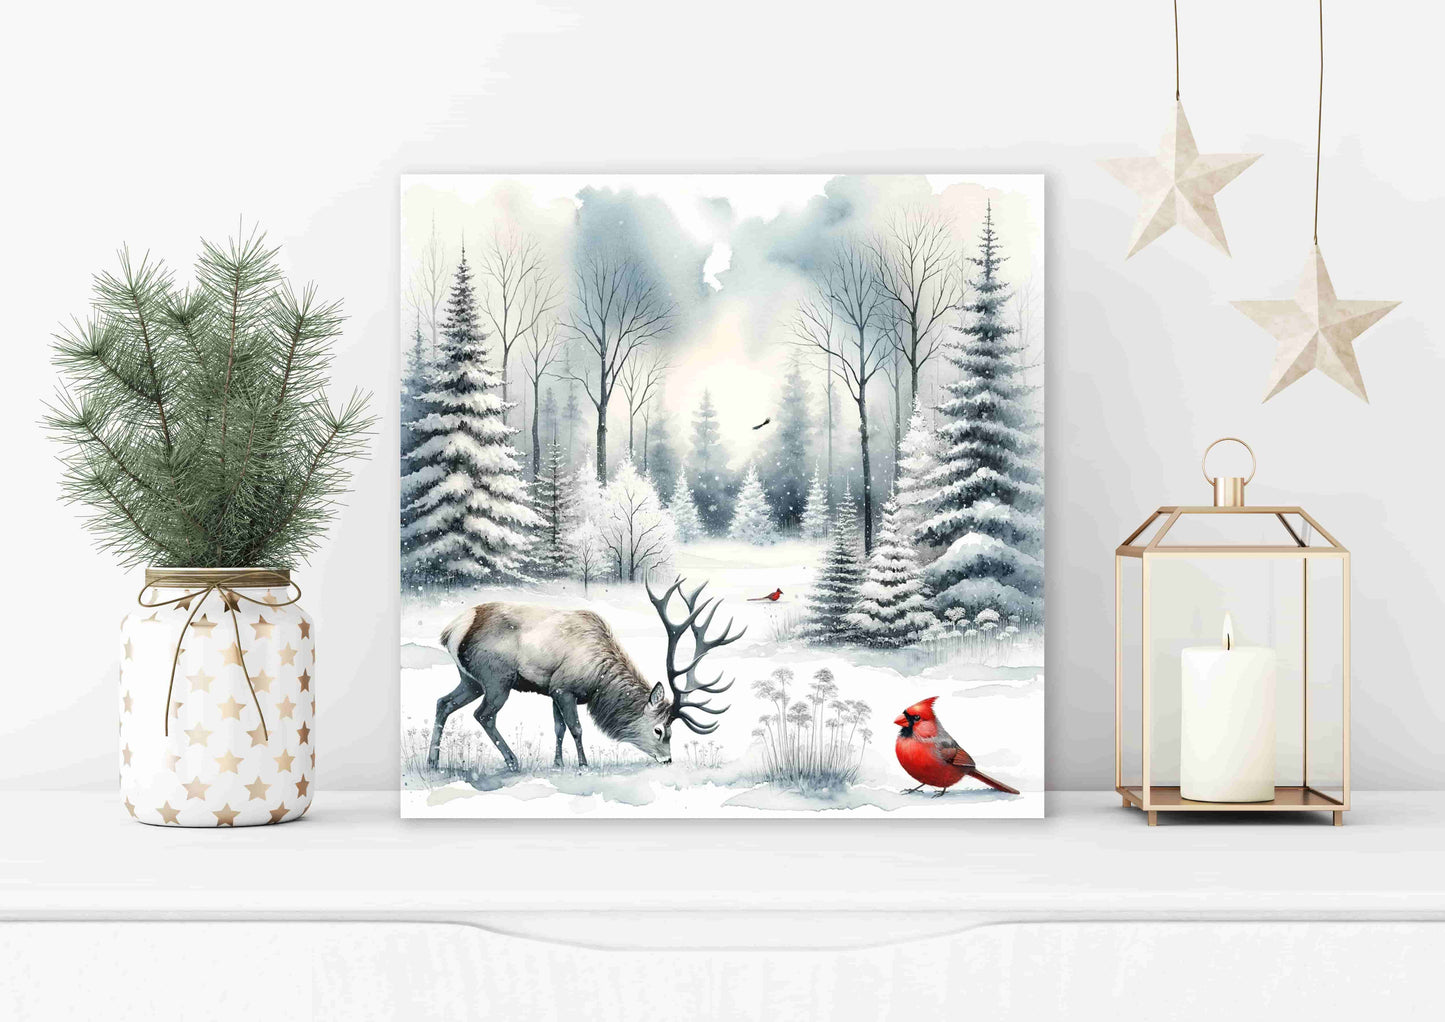 "Tranquil Winter's Grace - Stag and Cardinal in Snowy Solitude" Wrapped Canvas wall Art Prints